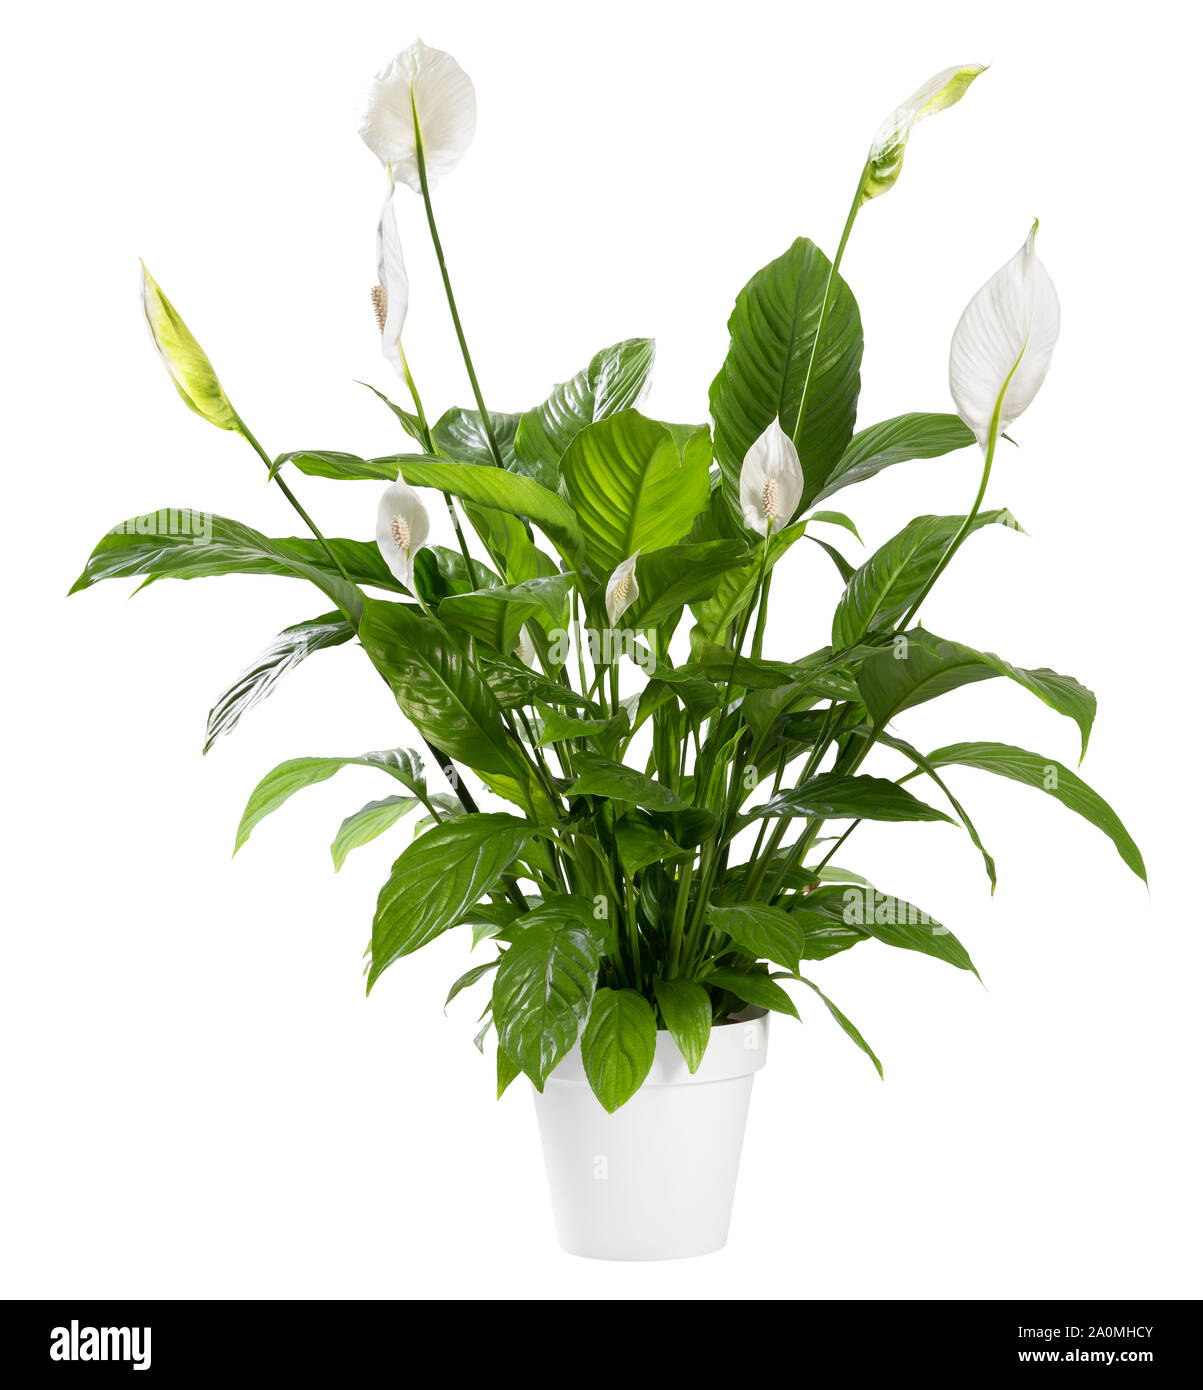 Potted Spathiphyllum plant with delicate white flowers with ornamental spathes also known as the Peace lily isolated over white background Stock Photo